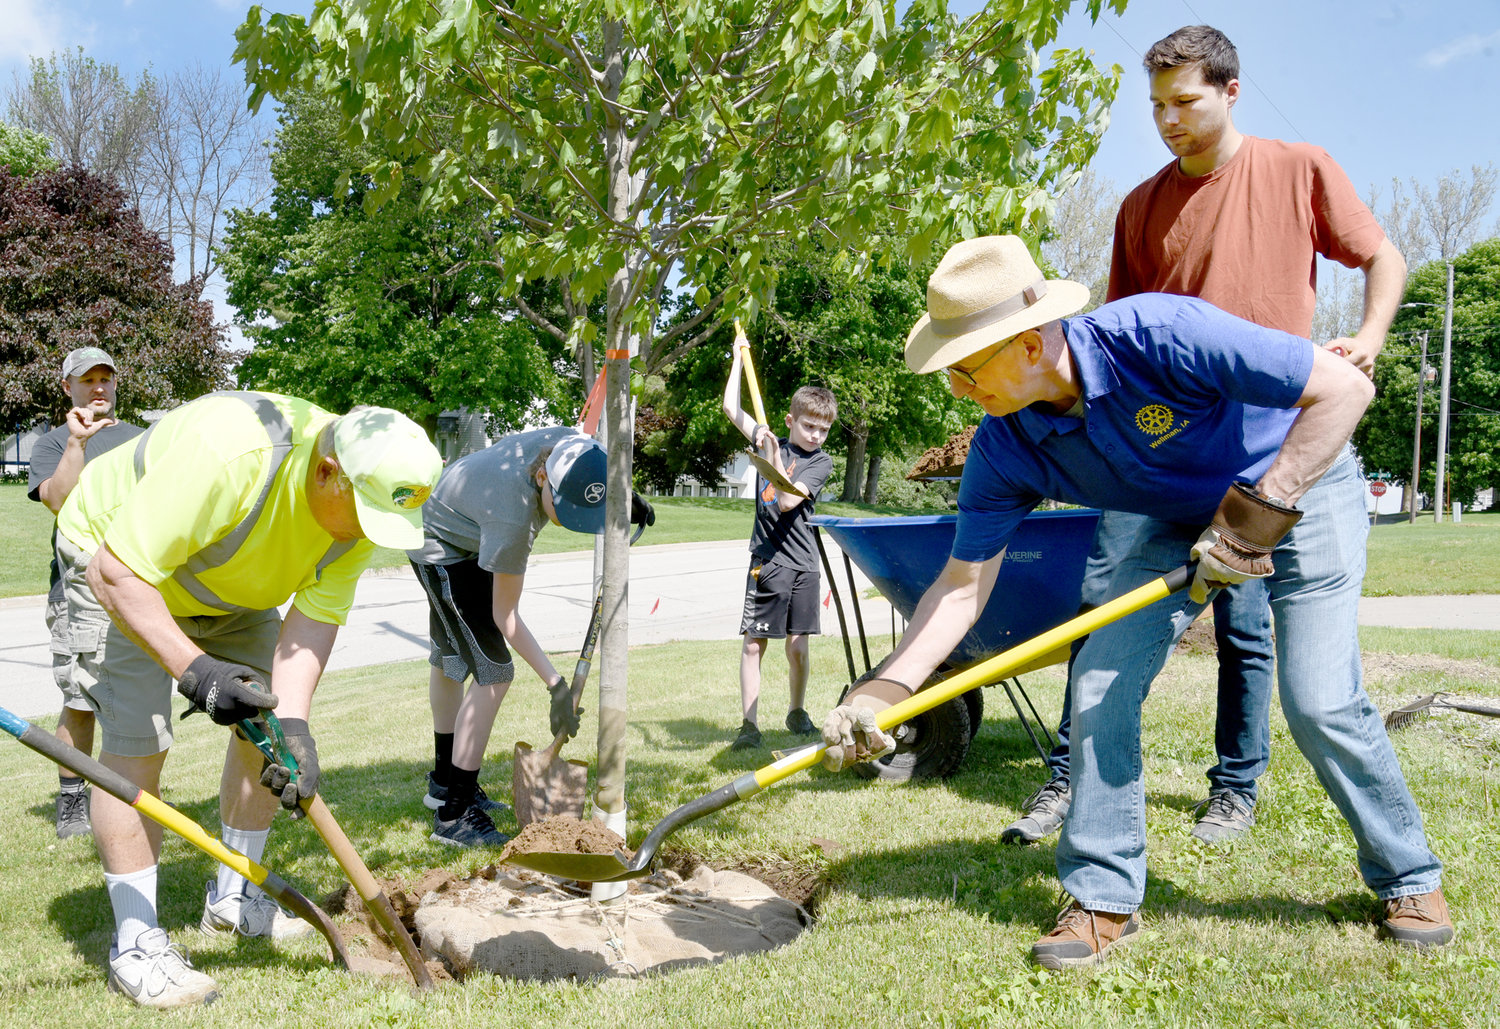 From left, Leroy Powell, Kelyn Yoder and Allen Leichty fill in a hole with dirt. In the background, Jason Yoder and Jonah Van Roekel shovel dirt from a wheelbarrow.